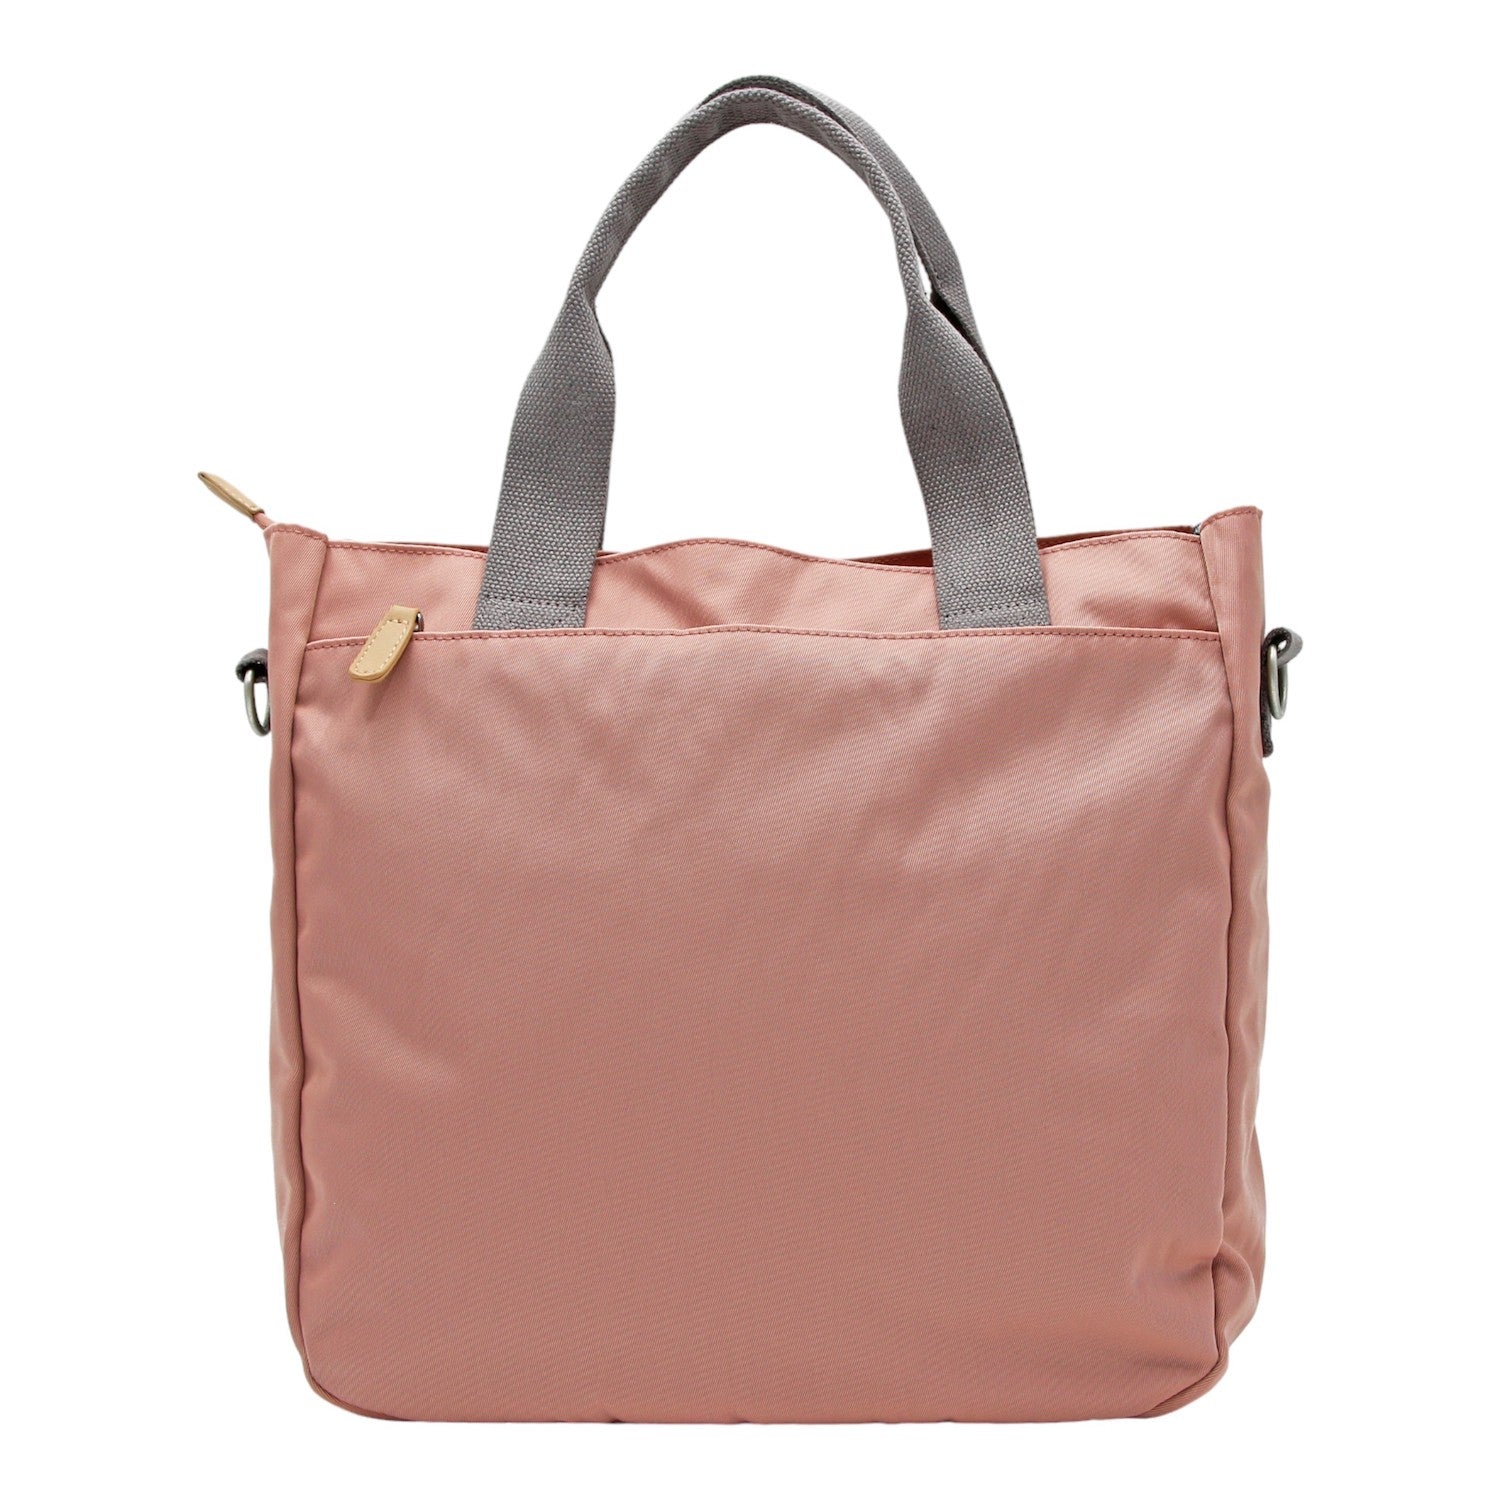 Covent Garden Tote Bag - Pink